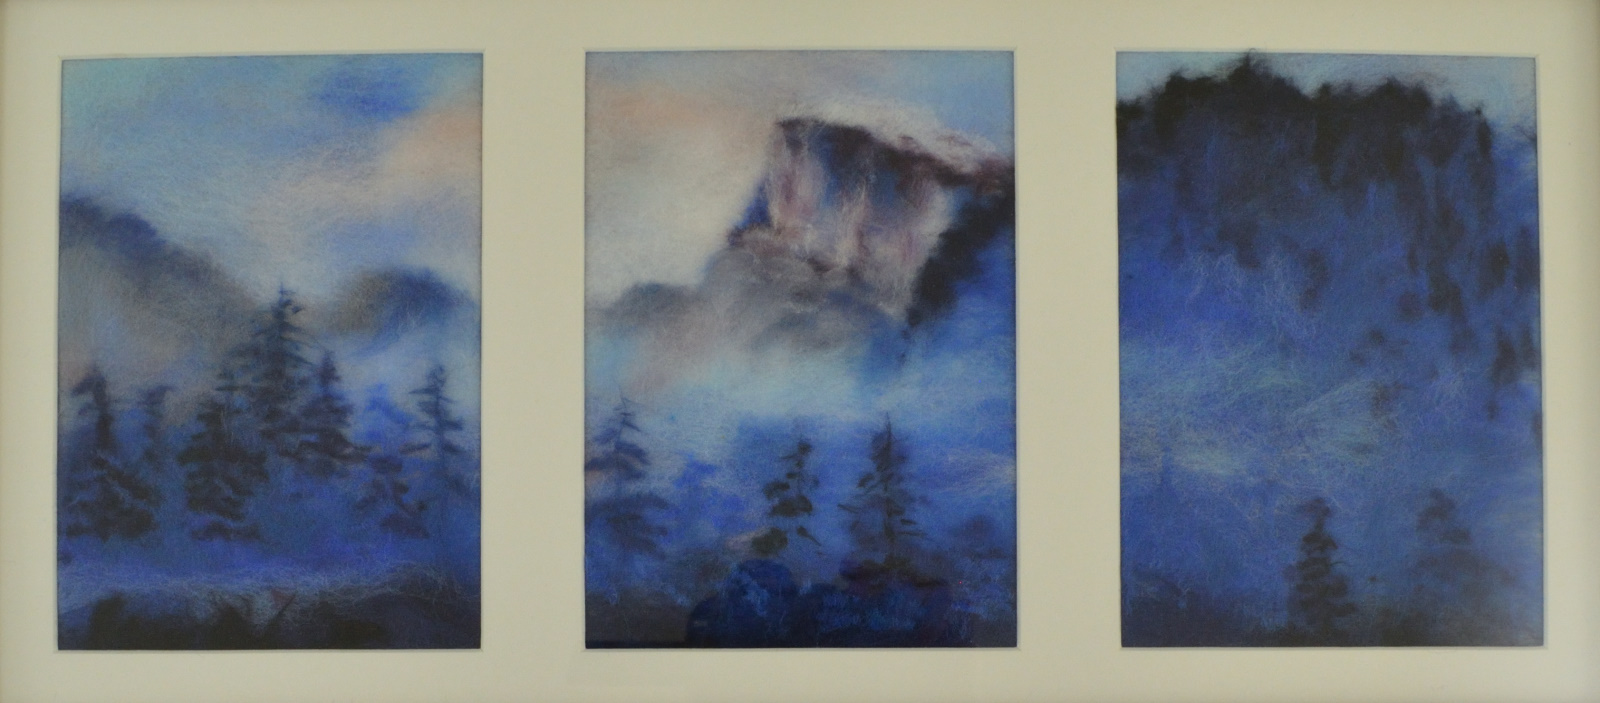 Foggy-mountains. Wool Art Gallery. Picture made of merino wool